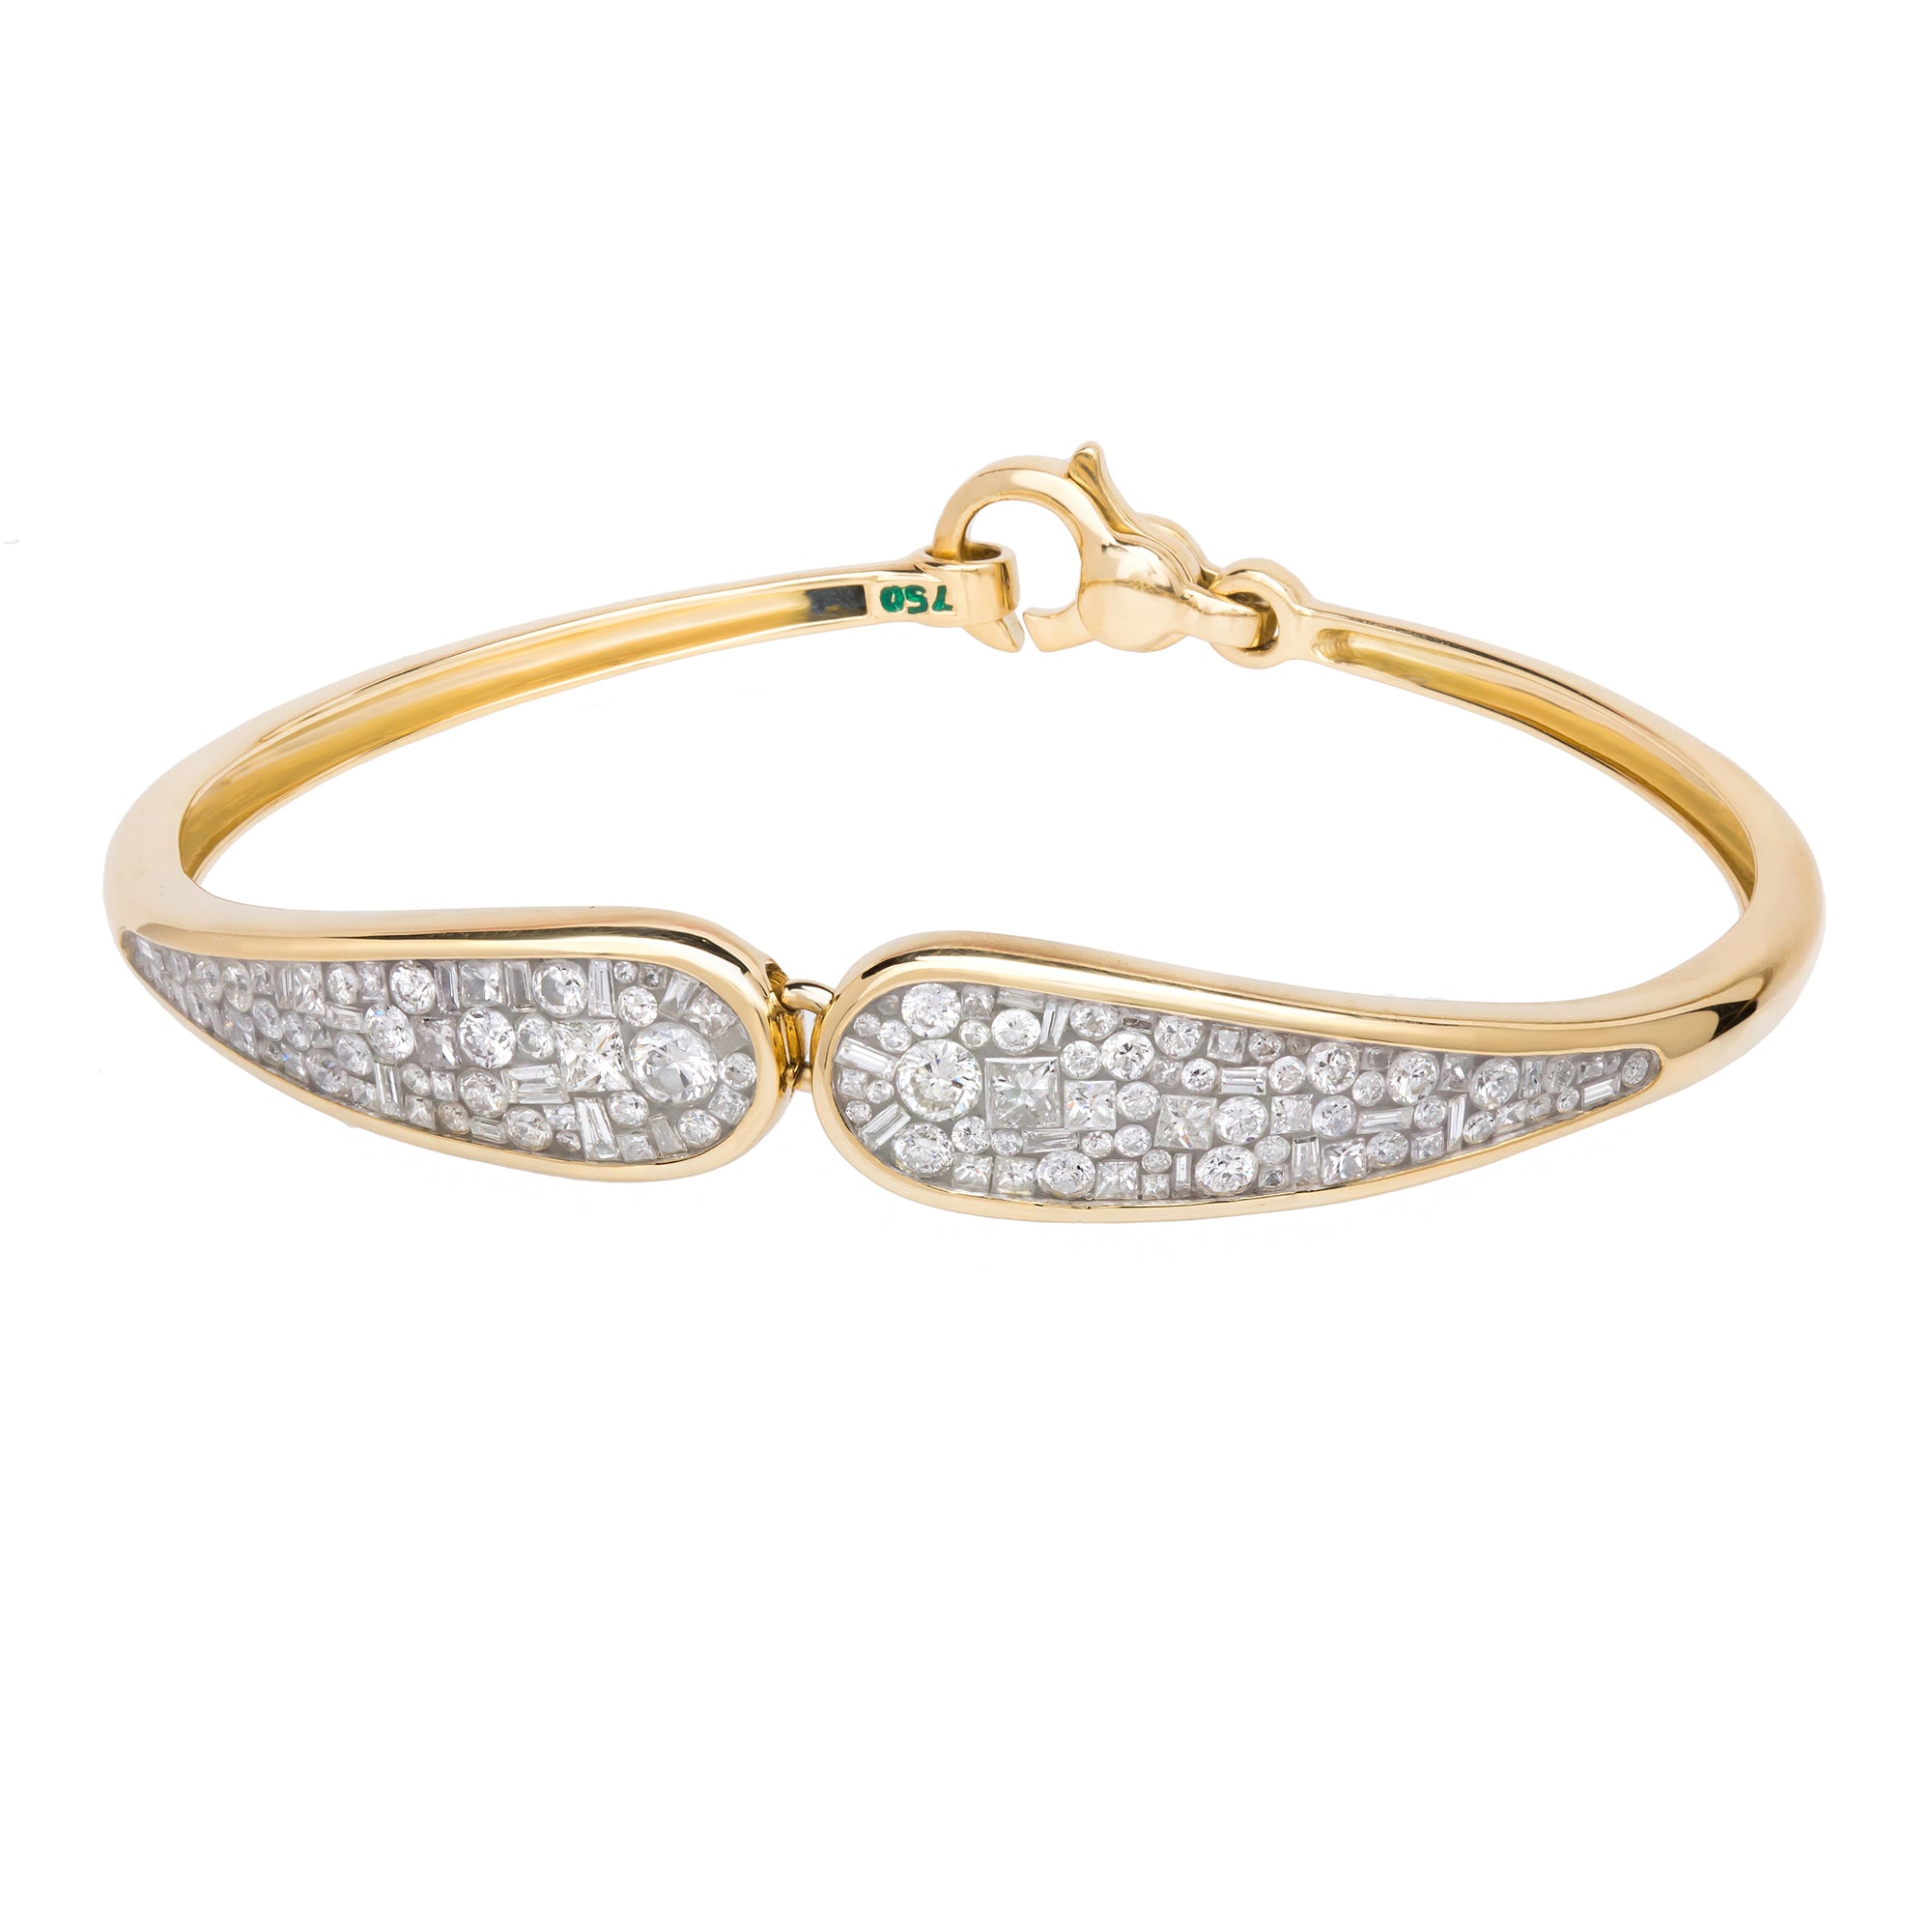 Ice Scorpion Diamond Bracelet by Pleve available at Talisman Collection Fine Jewelers in El Dorado Hills, CA and online. Specs: 2.00 cttw diamonds, 18k yellow gold. 